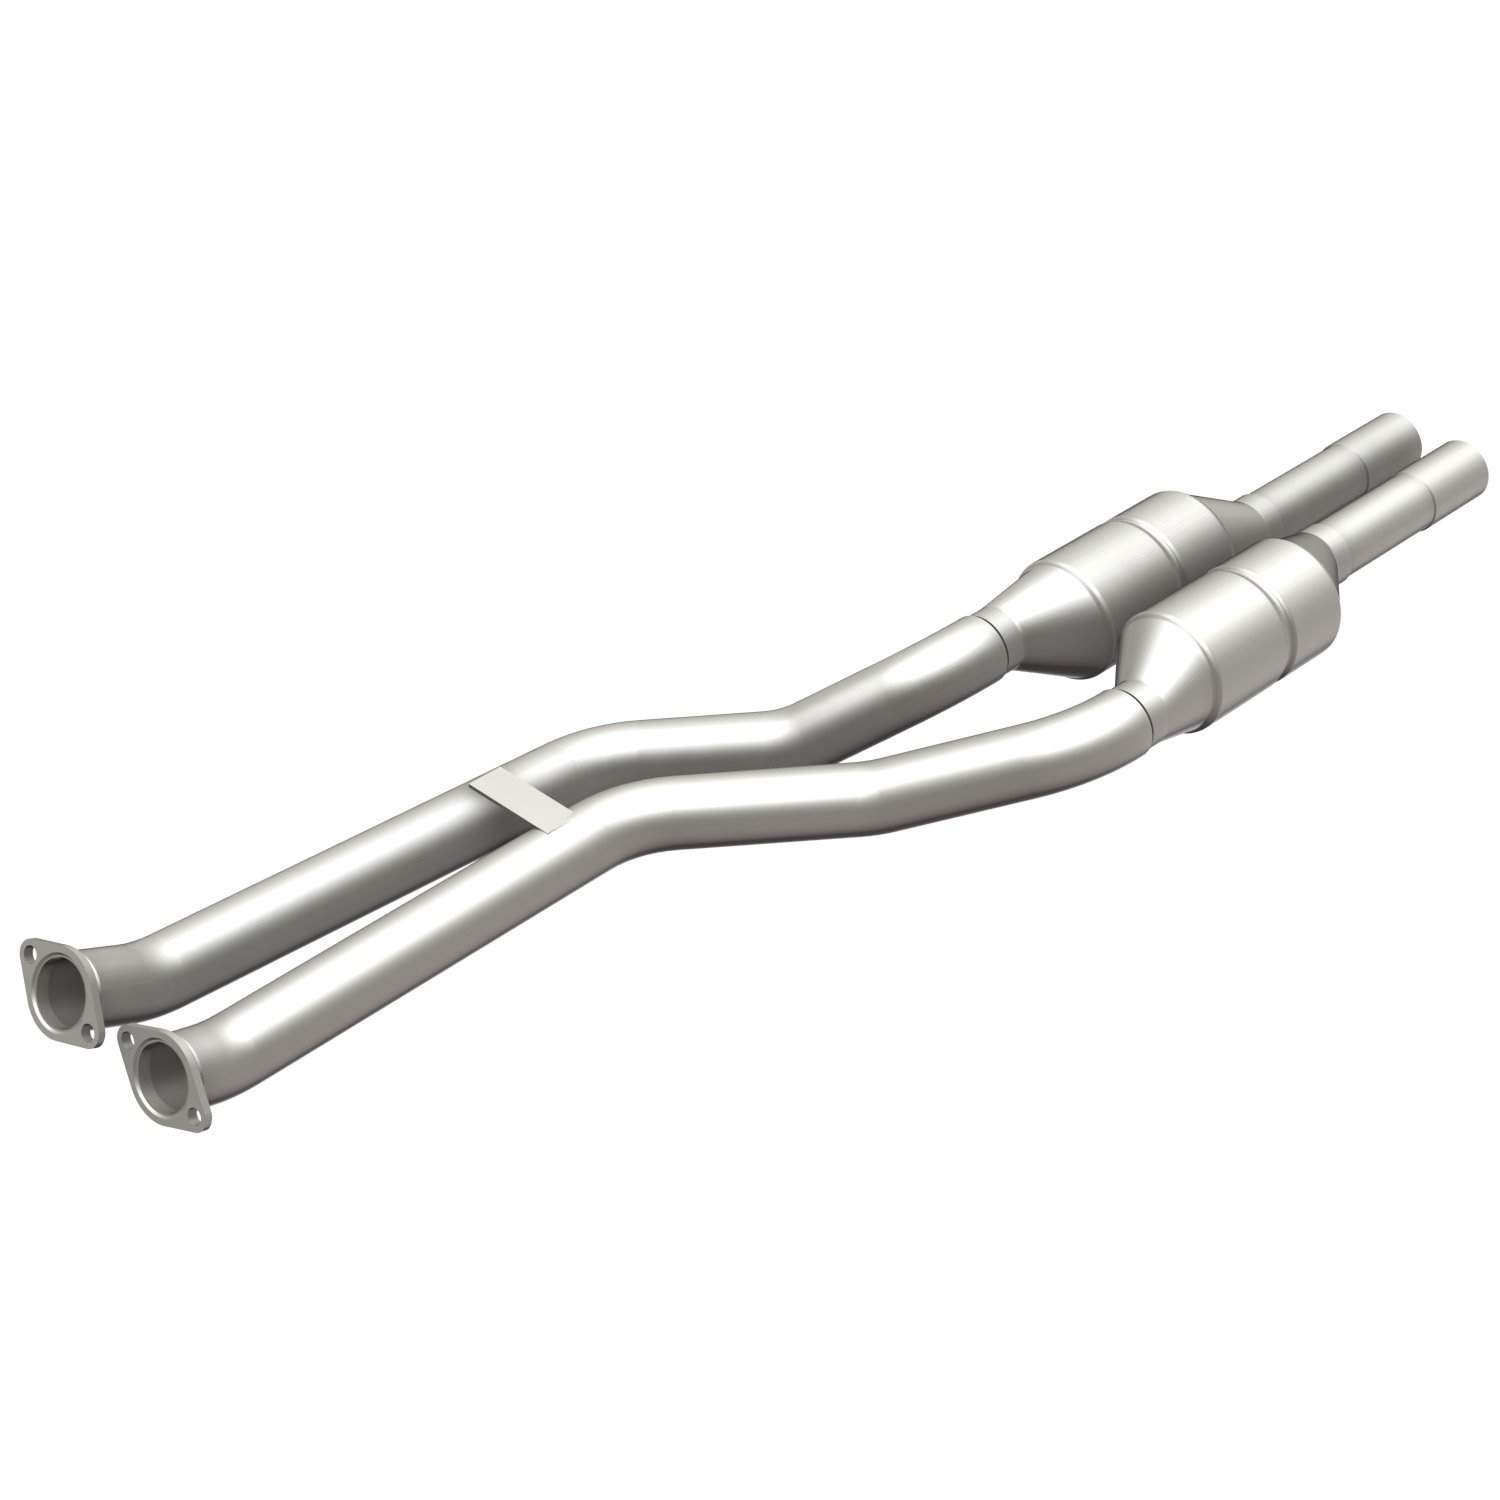 HM Grade Federal / EPA Compliant Direct-Fit Catalytic Converter 24510